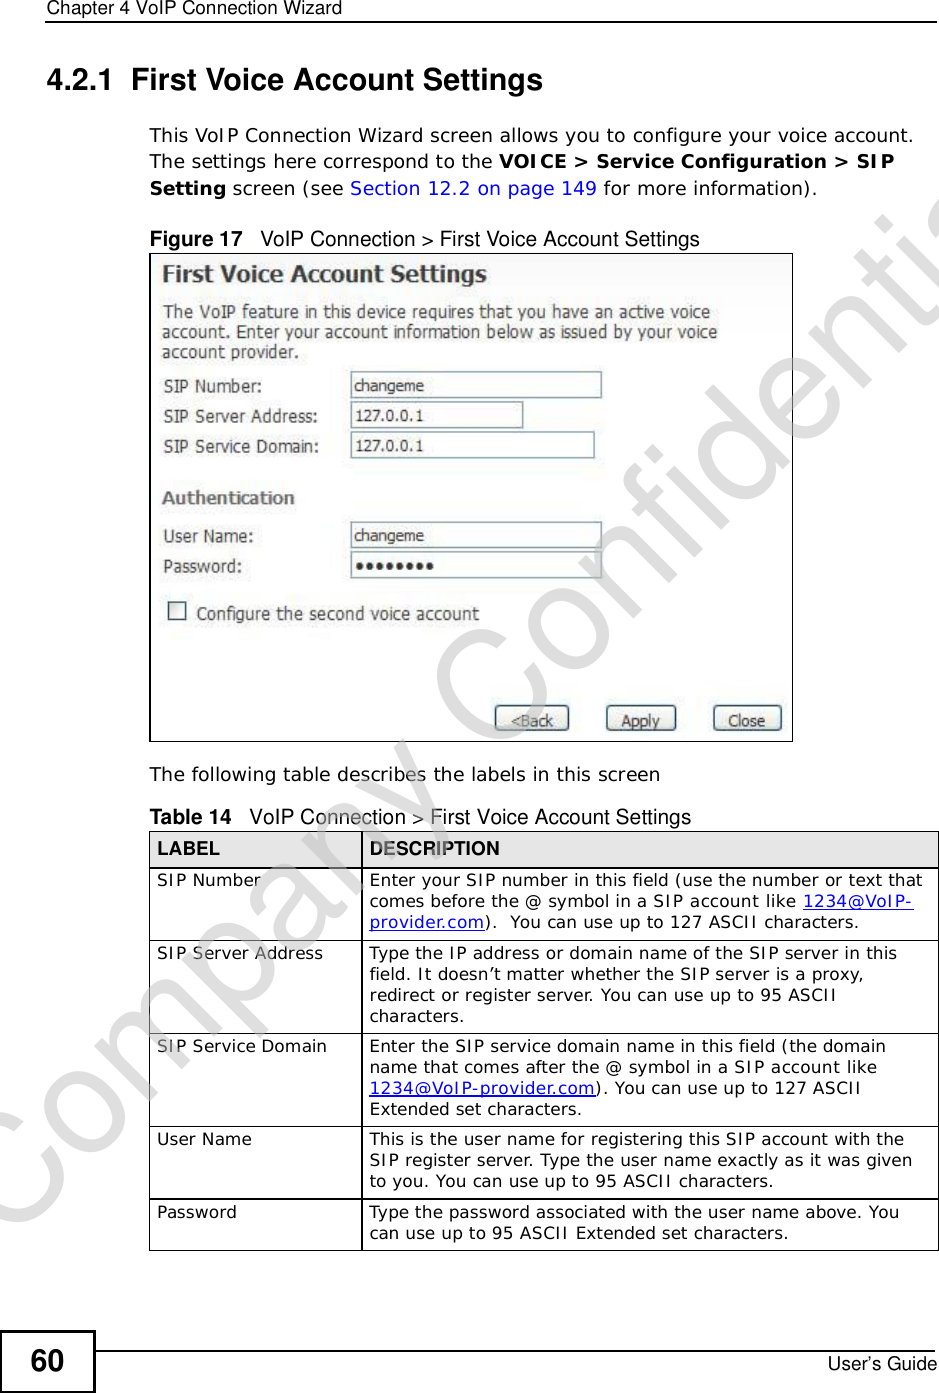 Chapter 4VoIP Connection WizardUser’s Guide604.2.1  First Voice Account SettingsThis VoIP Connection Wizard screen allows you to configure your voice account. The settings here correspond to the VOICE &gt; Service Configuration &gt; SIP Setting screen (see Section 12.2 on page 149 for more information).Figure 17   VoIP Connection &gt; First Voice Account SettingsThe following table describes the labels in this screenTable 14   VoIP Connection &gt; First Voice Account SettingsLABEL DESCRIPTIONSIP NumberEnter your SIP number in this field (use the number or text that comes before the @ symbol in a SIP account like 1234@VoIP-provider.com).  You can use up to 127 ASCII characters.SIP Server AddressType the IP address or domain name of the SIP server in this field. It doesn’t matter whether the SIP server is a proxy, redirect or register server. You can use up to 95 ASCII characters.SIP Service DomainEnter the SIP service domain name in this field (the domain name that comes after the @ symbol in a SIP account like 1234@VoIP-provider.com). You can use up to 127 ASCII Extended set characters.User NameThis is the user name for registering this SIP account with the SIP register server. Type the user name exactly as it was given to you. You can use up to 95 ASCII characters.PasswordType the password associated with the user name above. You can use up to 95 ASCII Extended set characters.Company Confidential